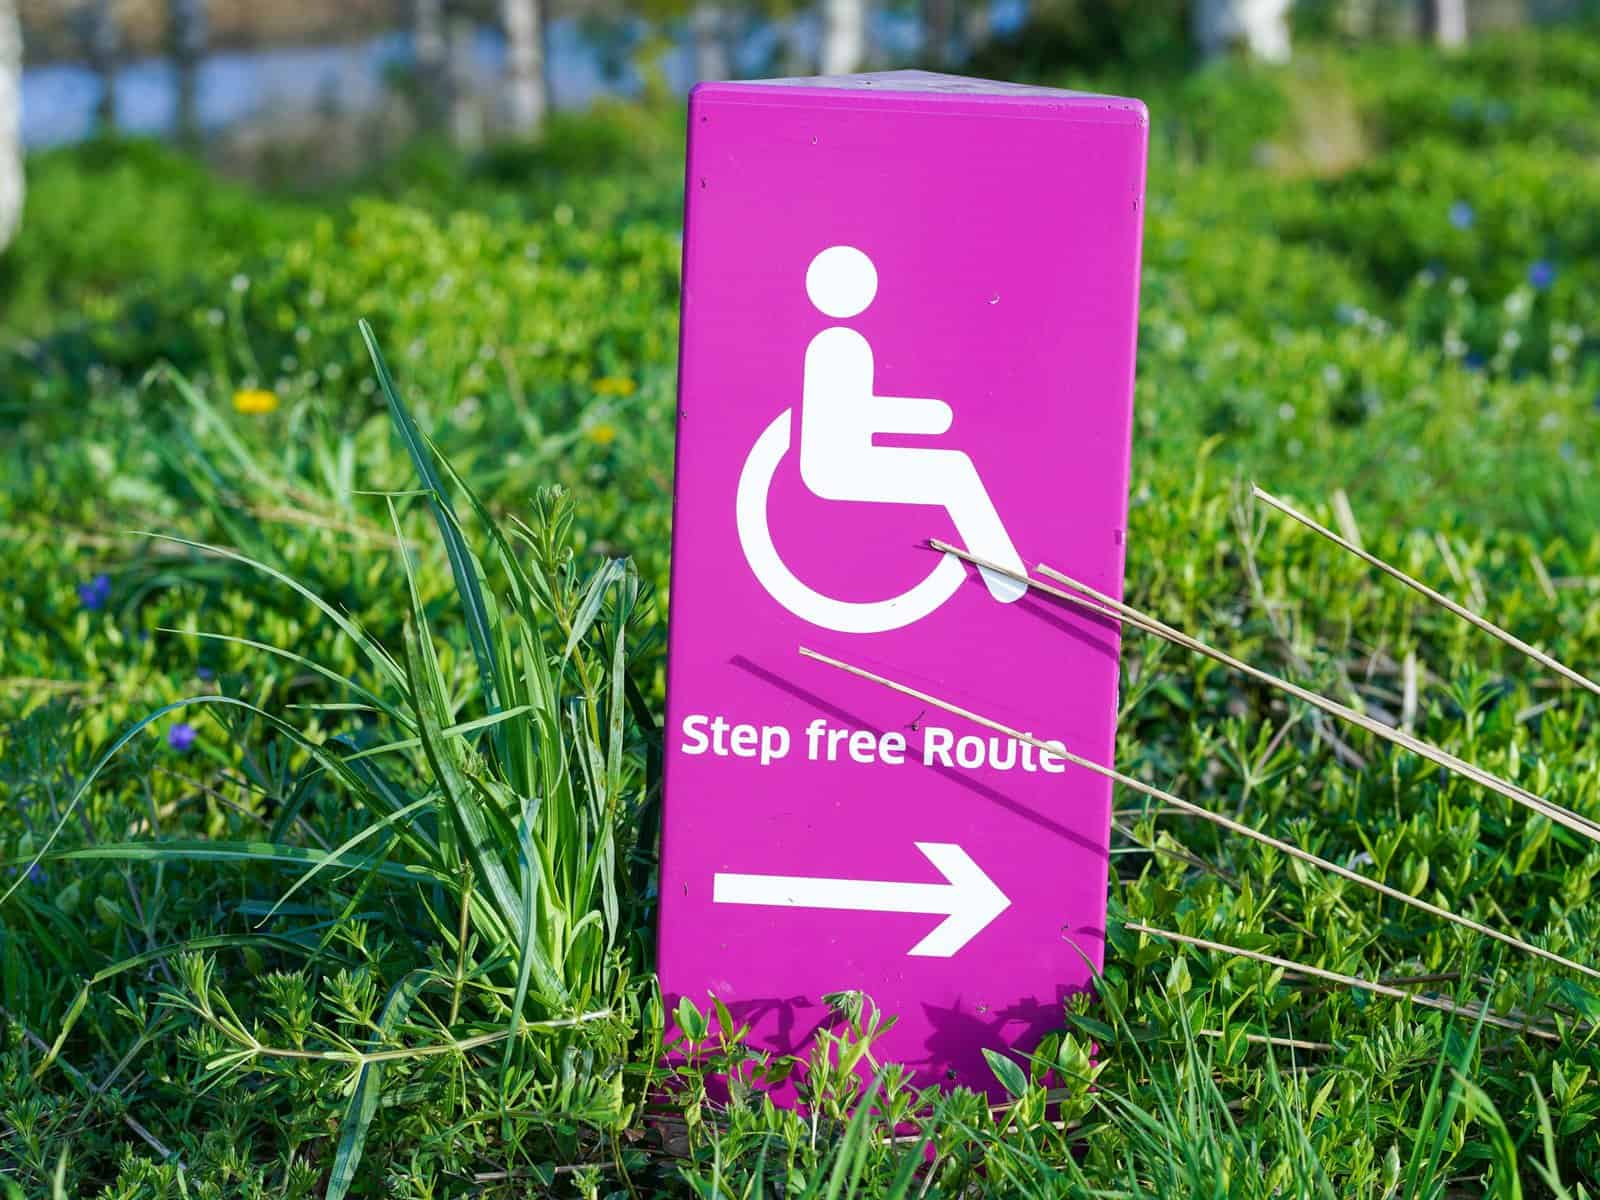 A bright pink sign shows a wheelchair graphic with the word "step free route' and an arrow.